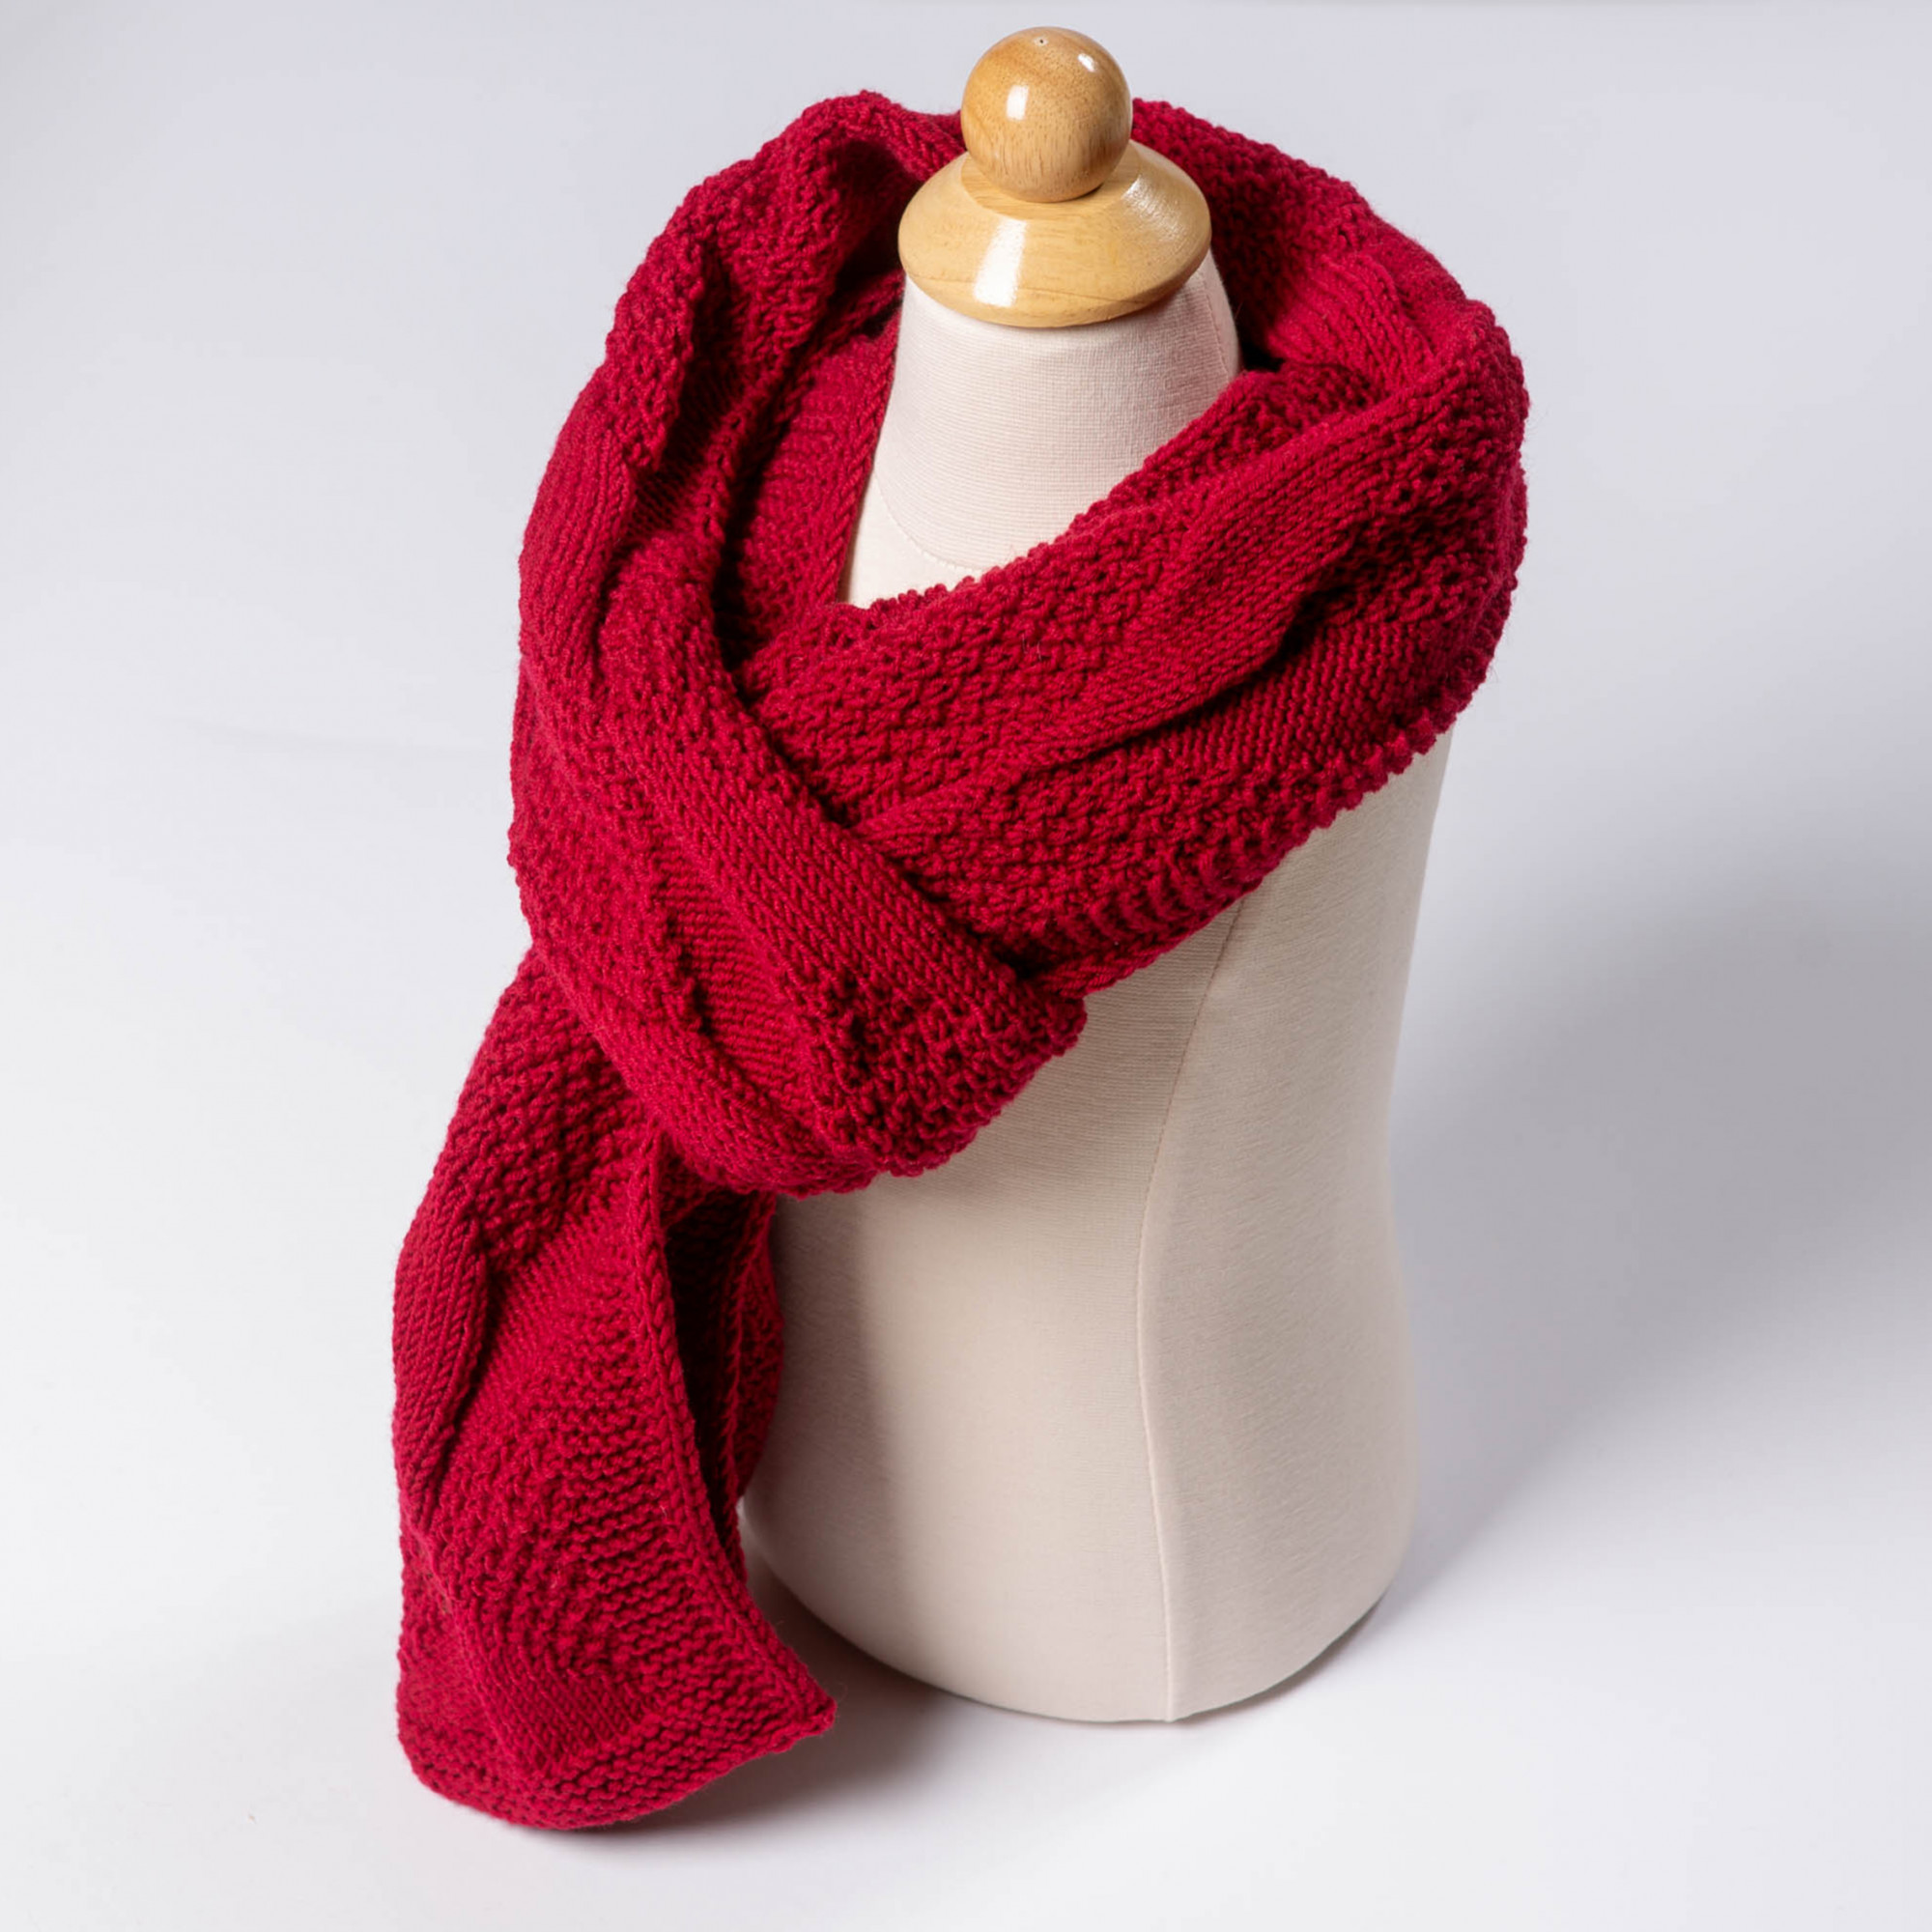 Soft red hand-knitted wool scarf